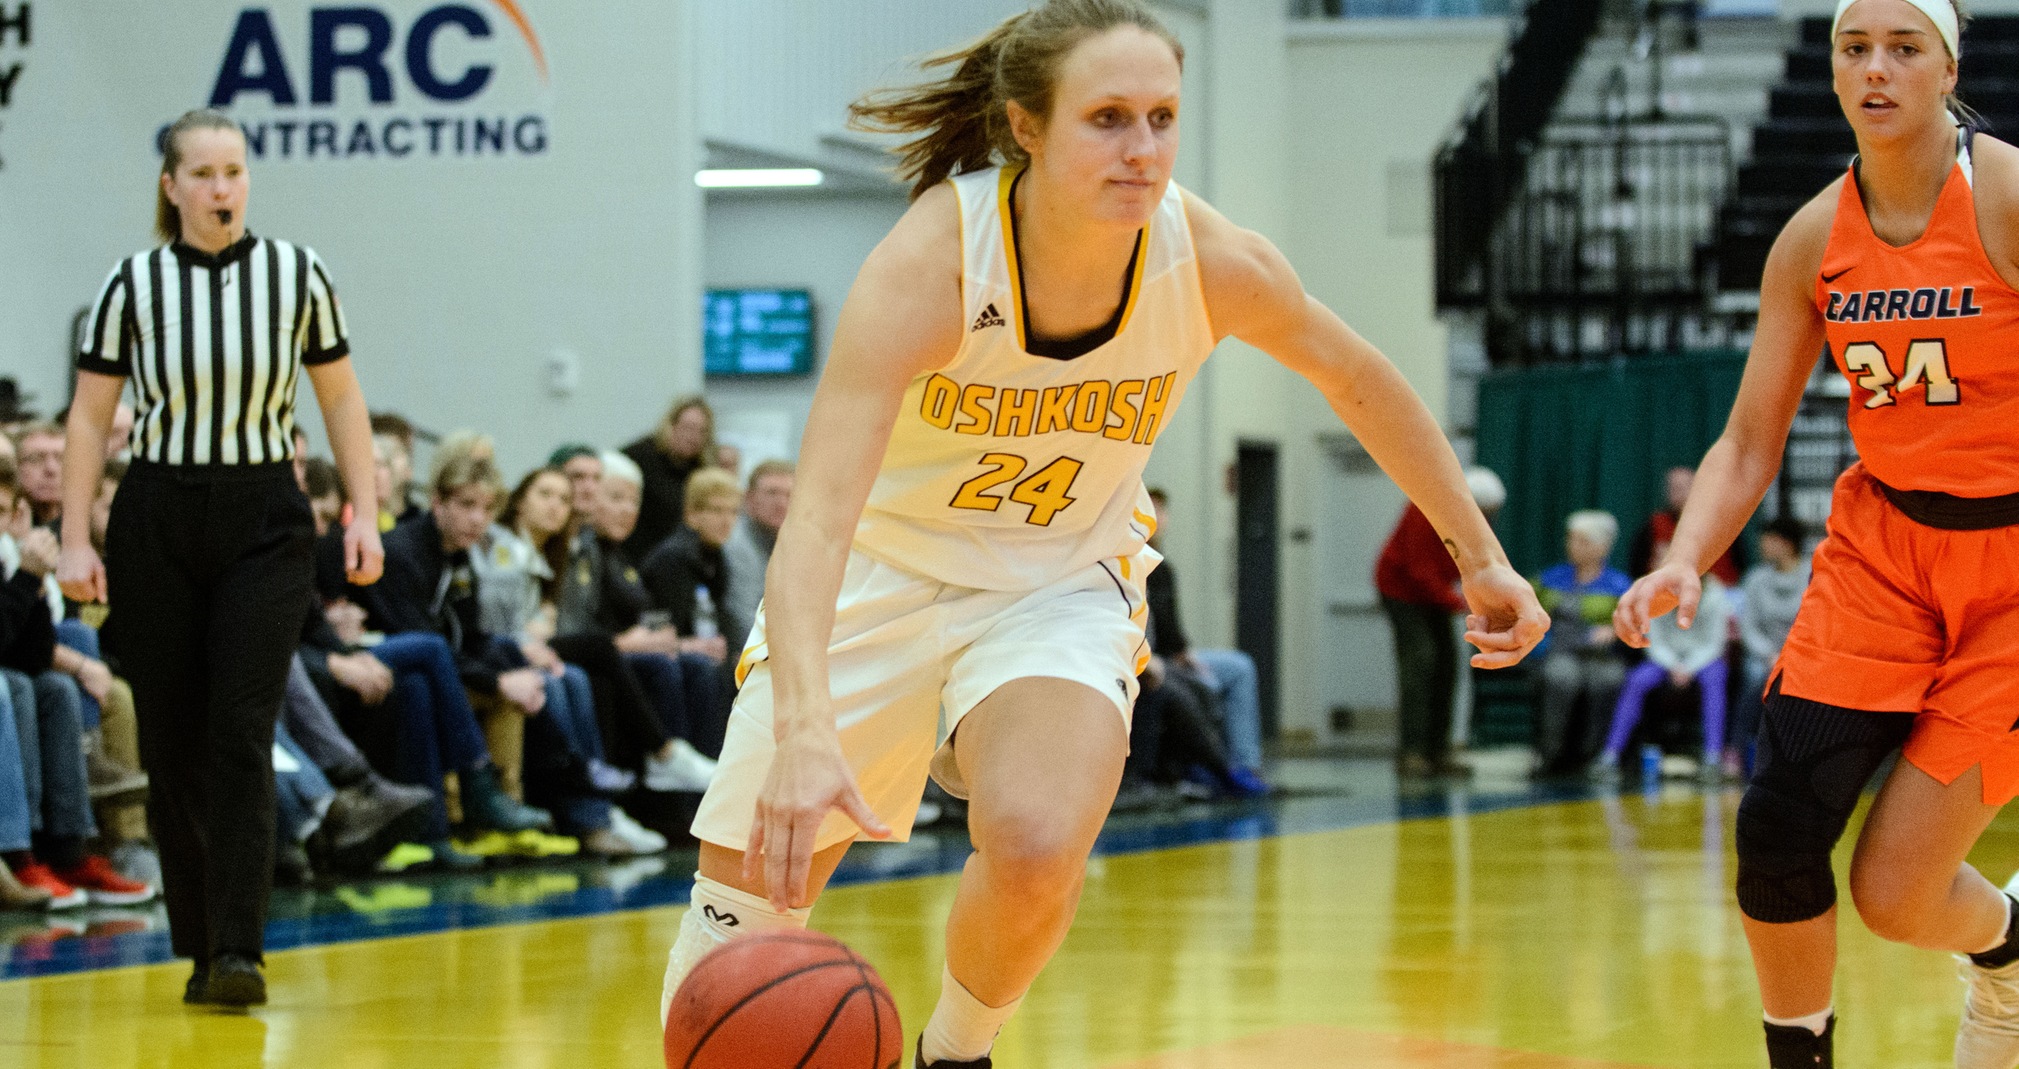 Eliza Campbell scored 17 points while adding four rebounds and two steals against the Pioneers.